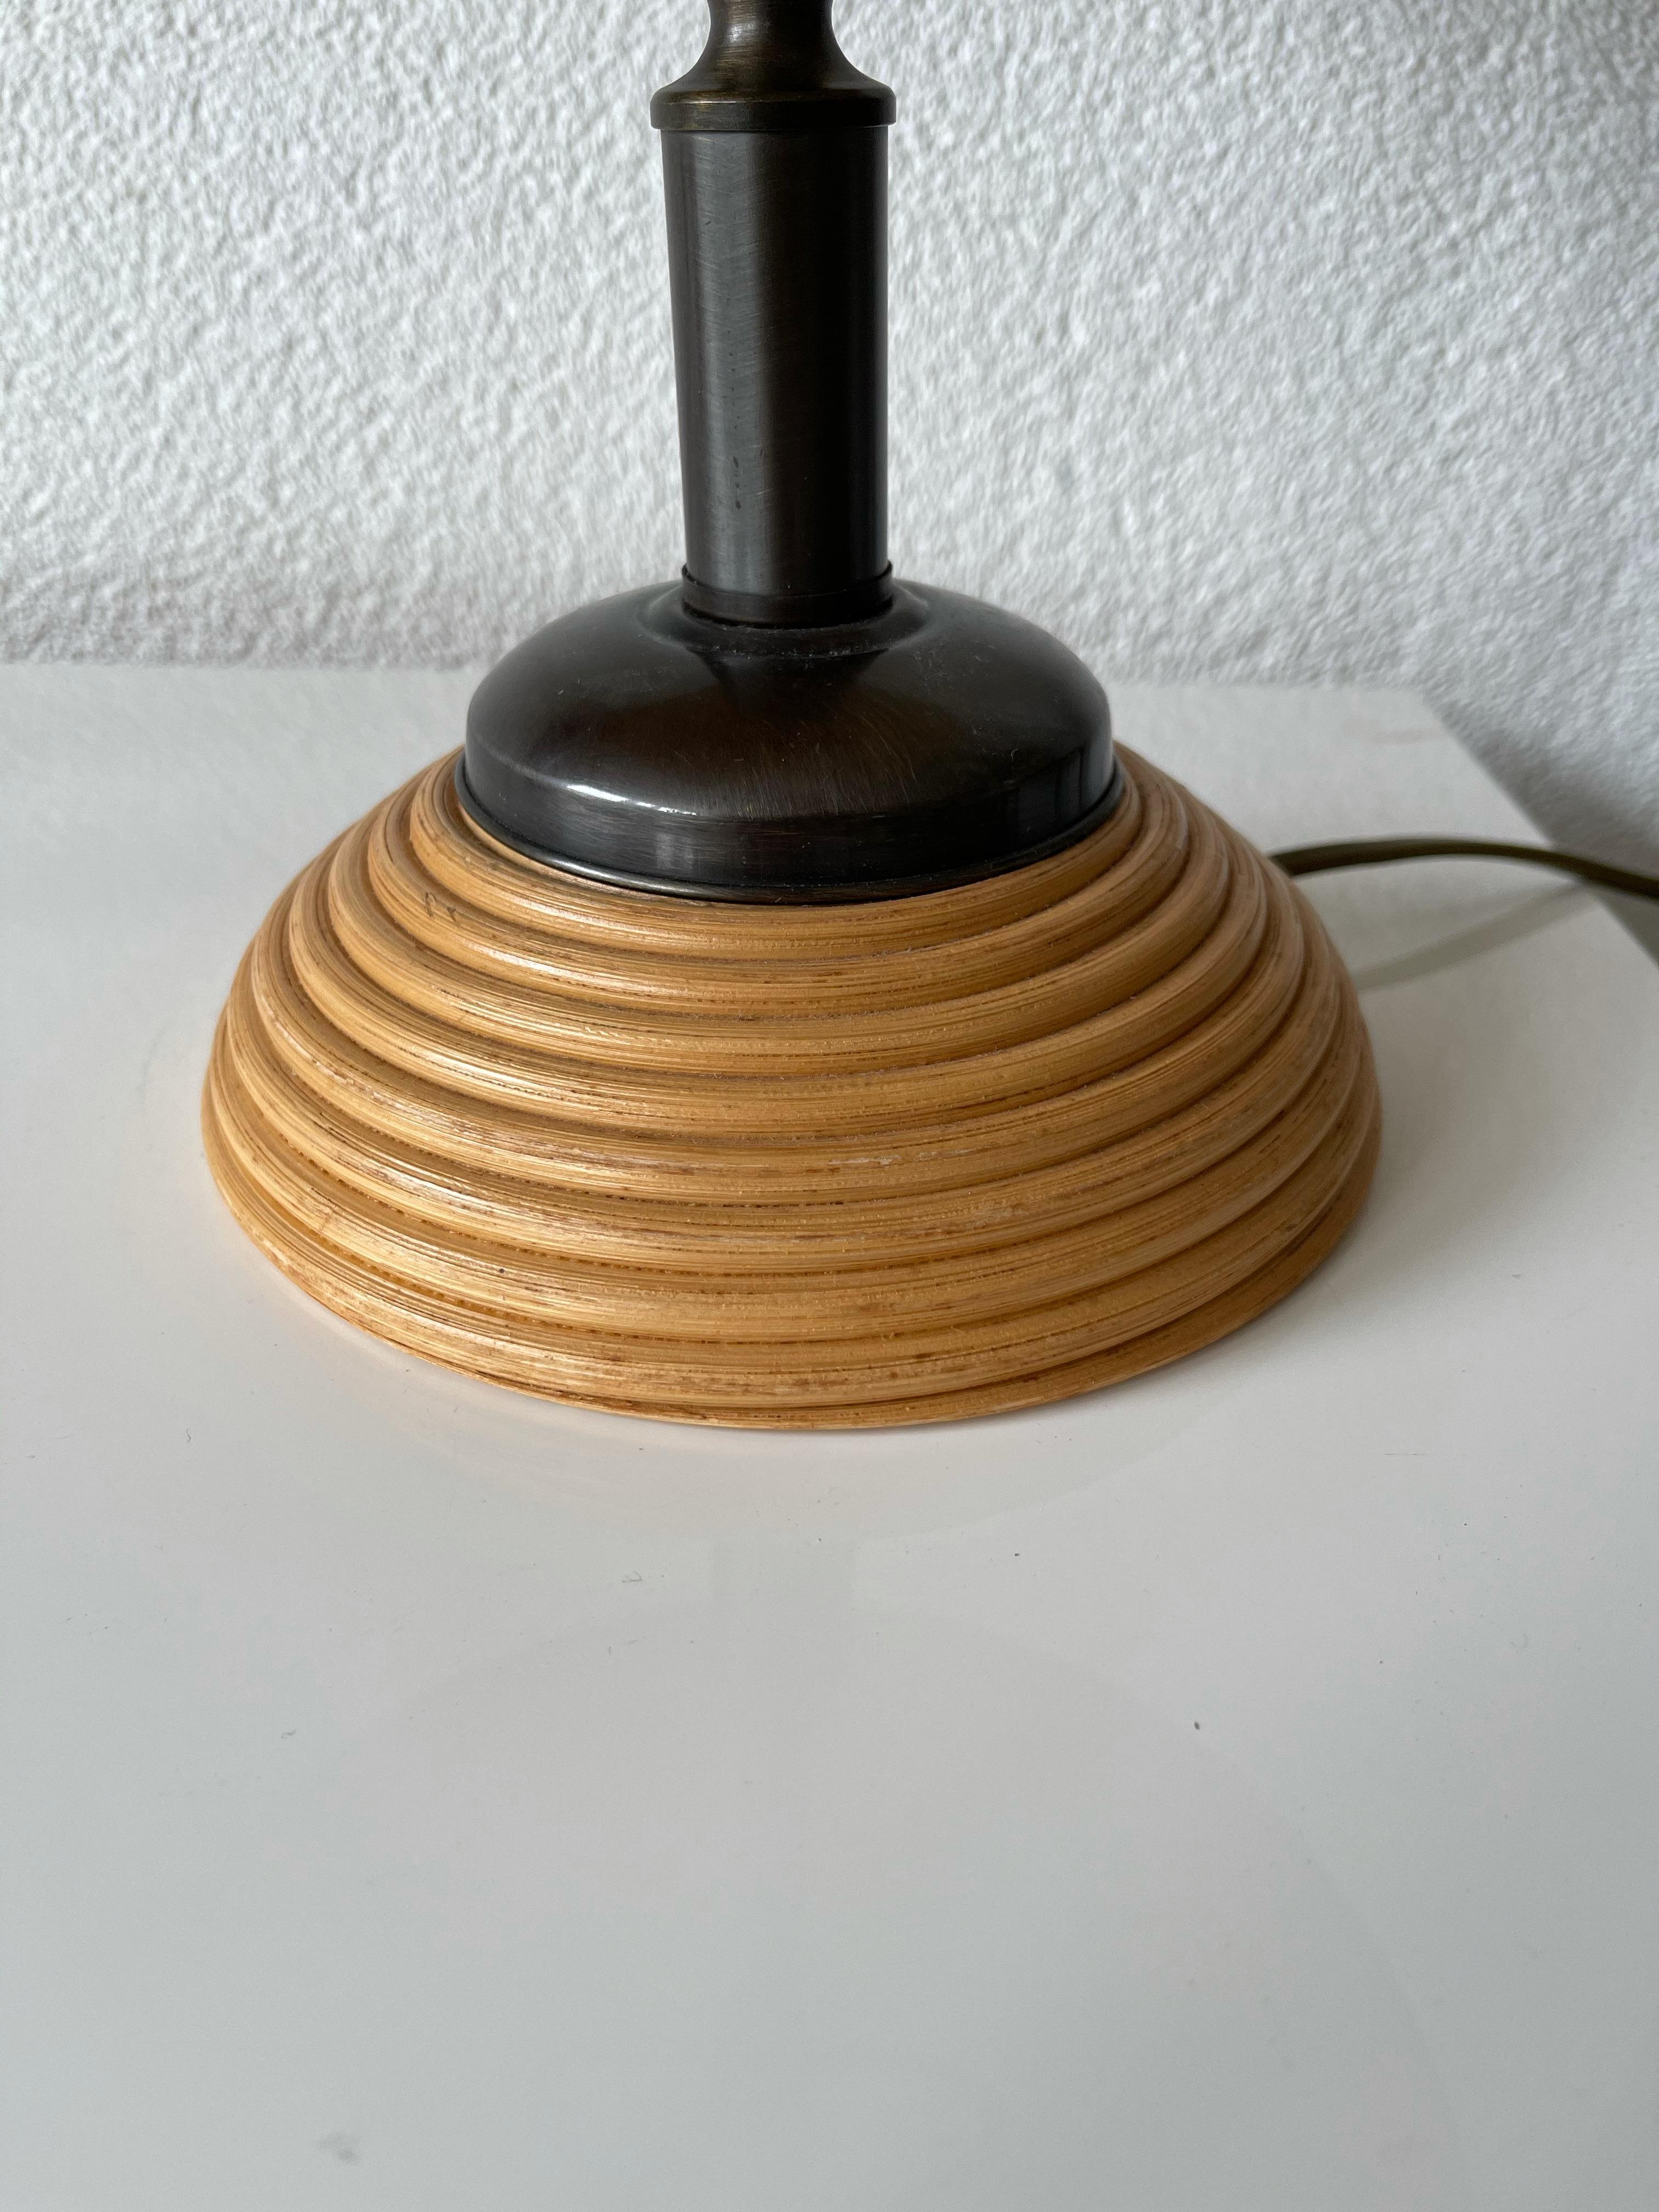 Rare & Stylish, Handcrafted Mid-Century Modern Rattan & Brass Table or Desk Lamp 1